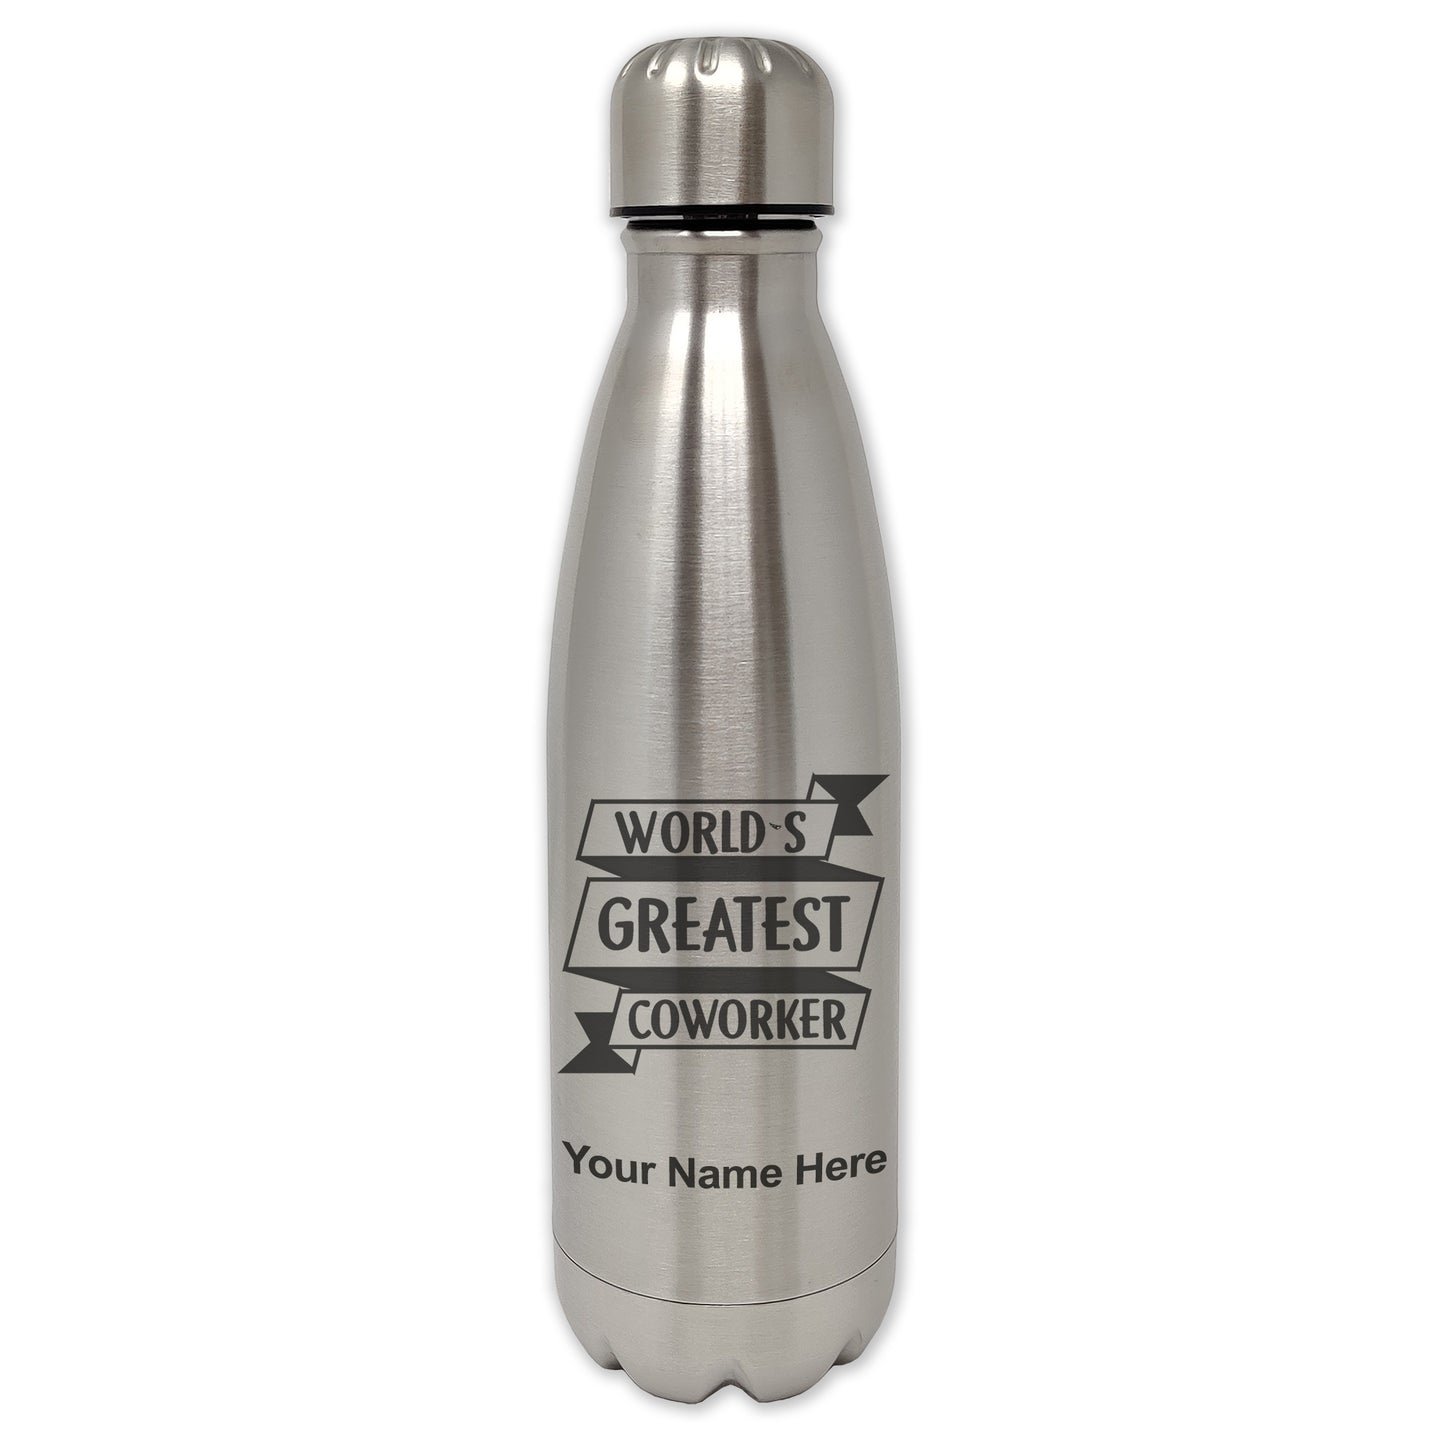 LaserGram Double Wall Water Bottle, World's Greatest Coworker, Personalized Engraving Included